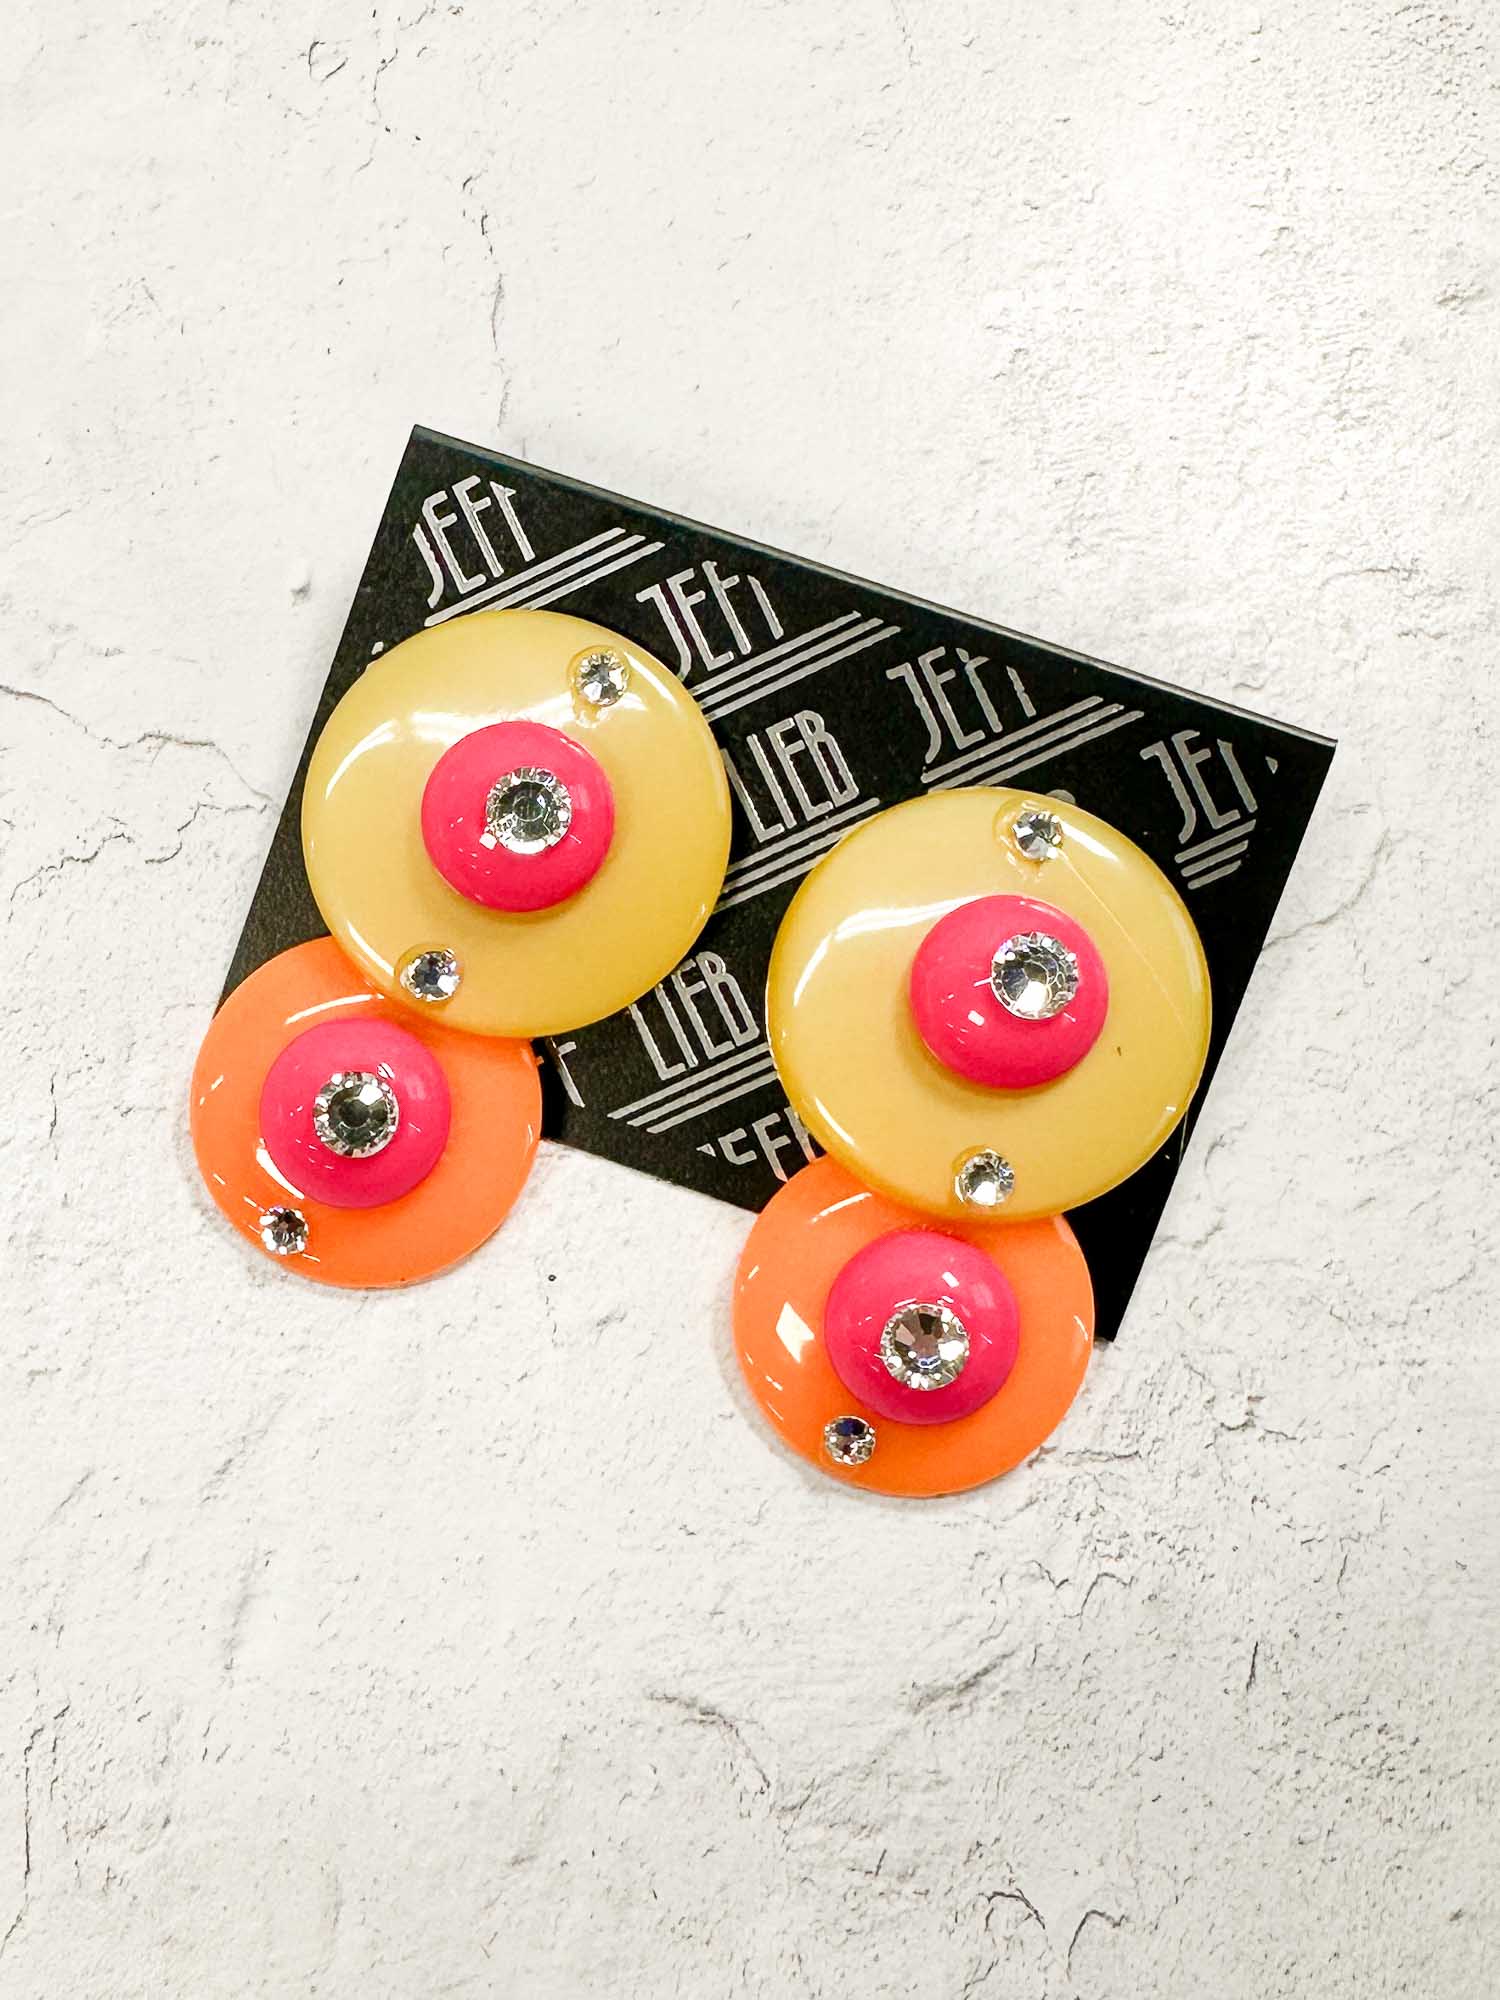 Jeff Lieb Total Design Jewelry Round Deco Drop Earrings, Orange/Pink/Yellow - Statement Boutique